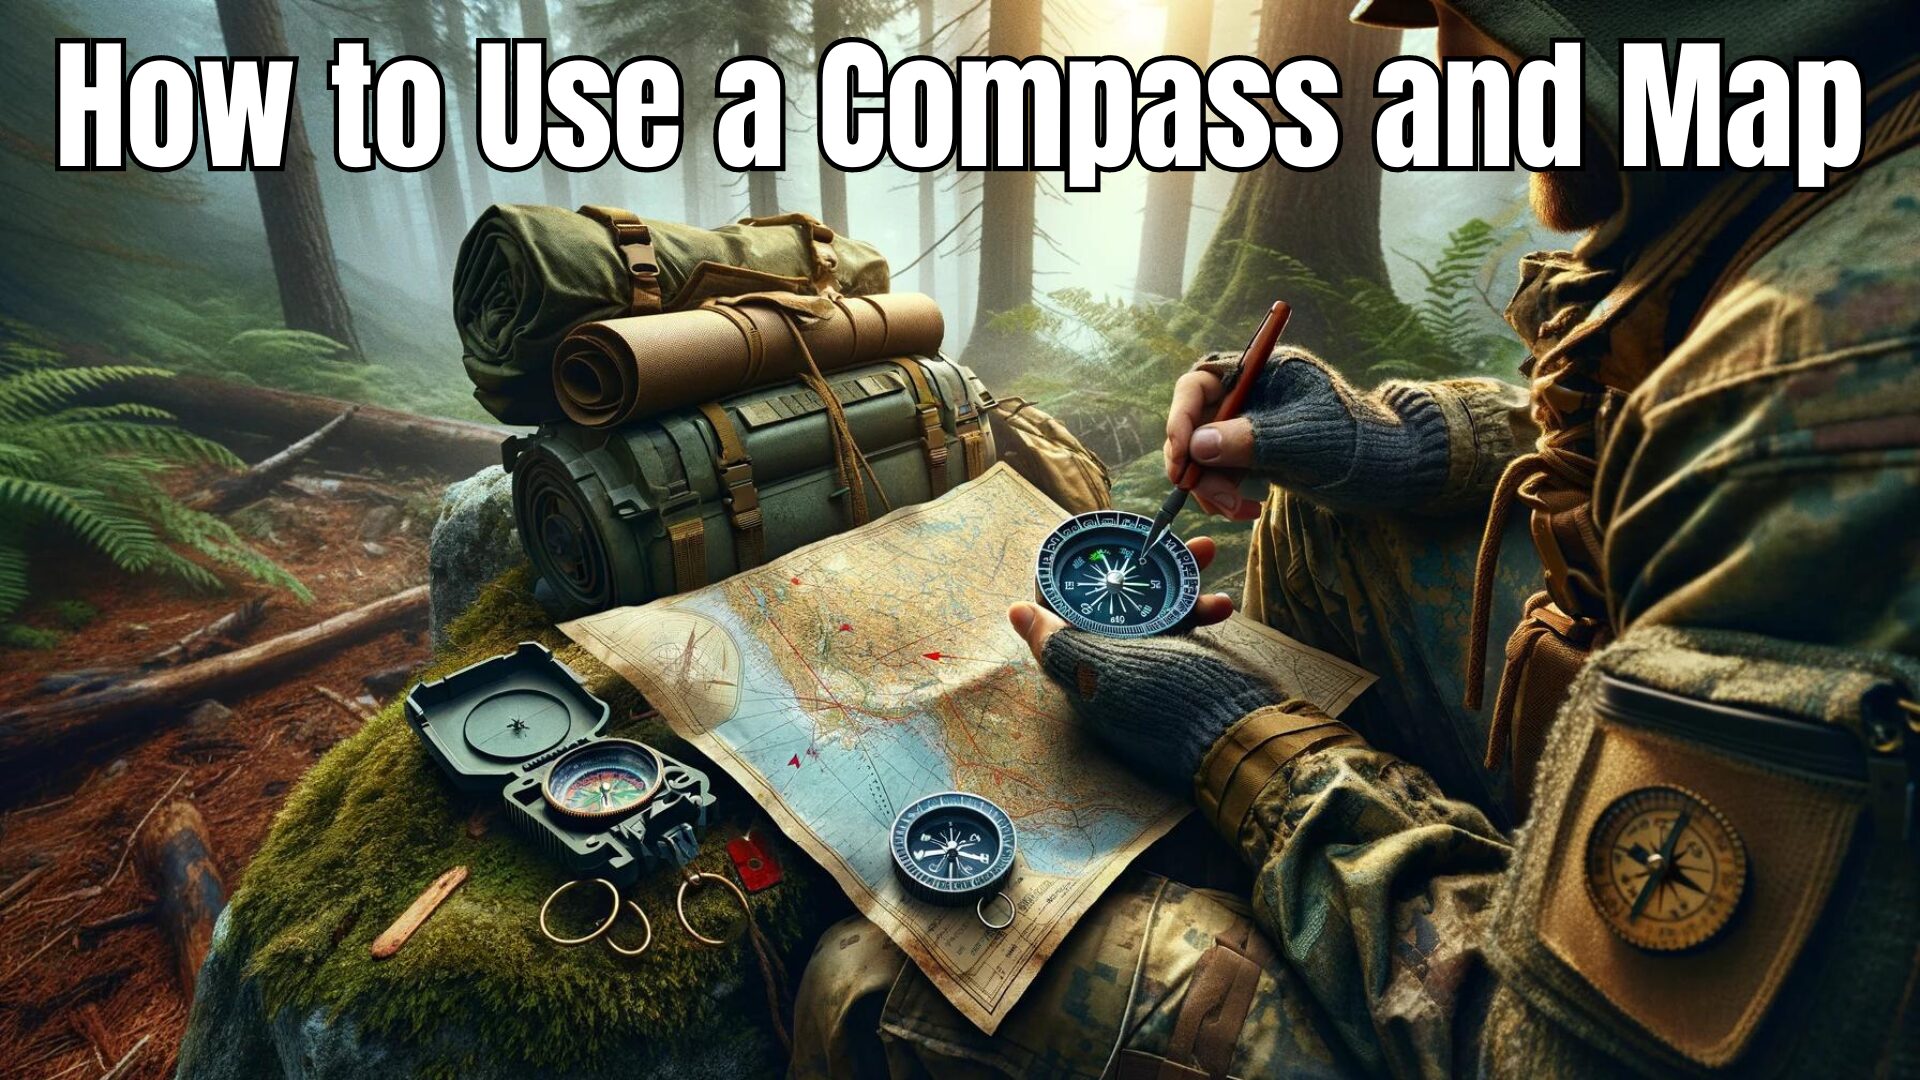 How to Use a Compass and Map